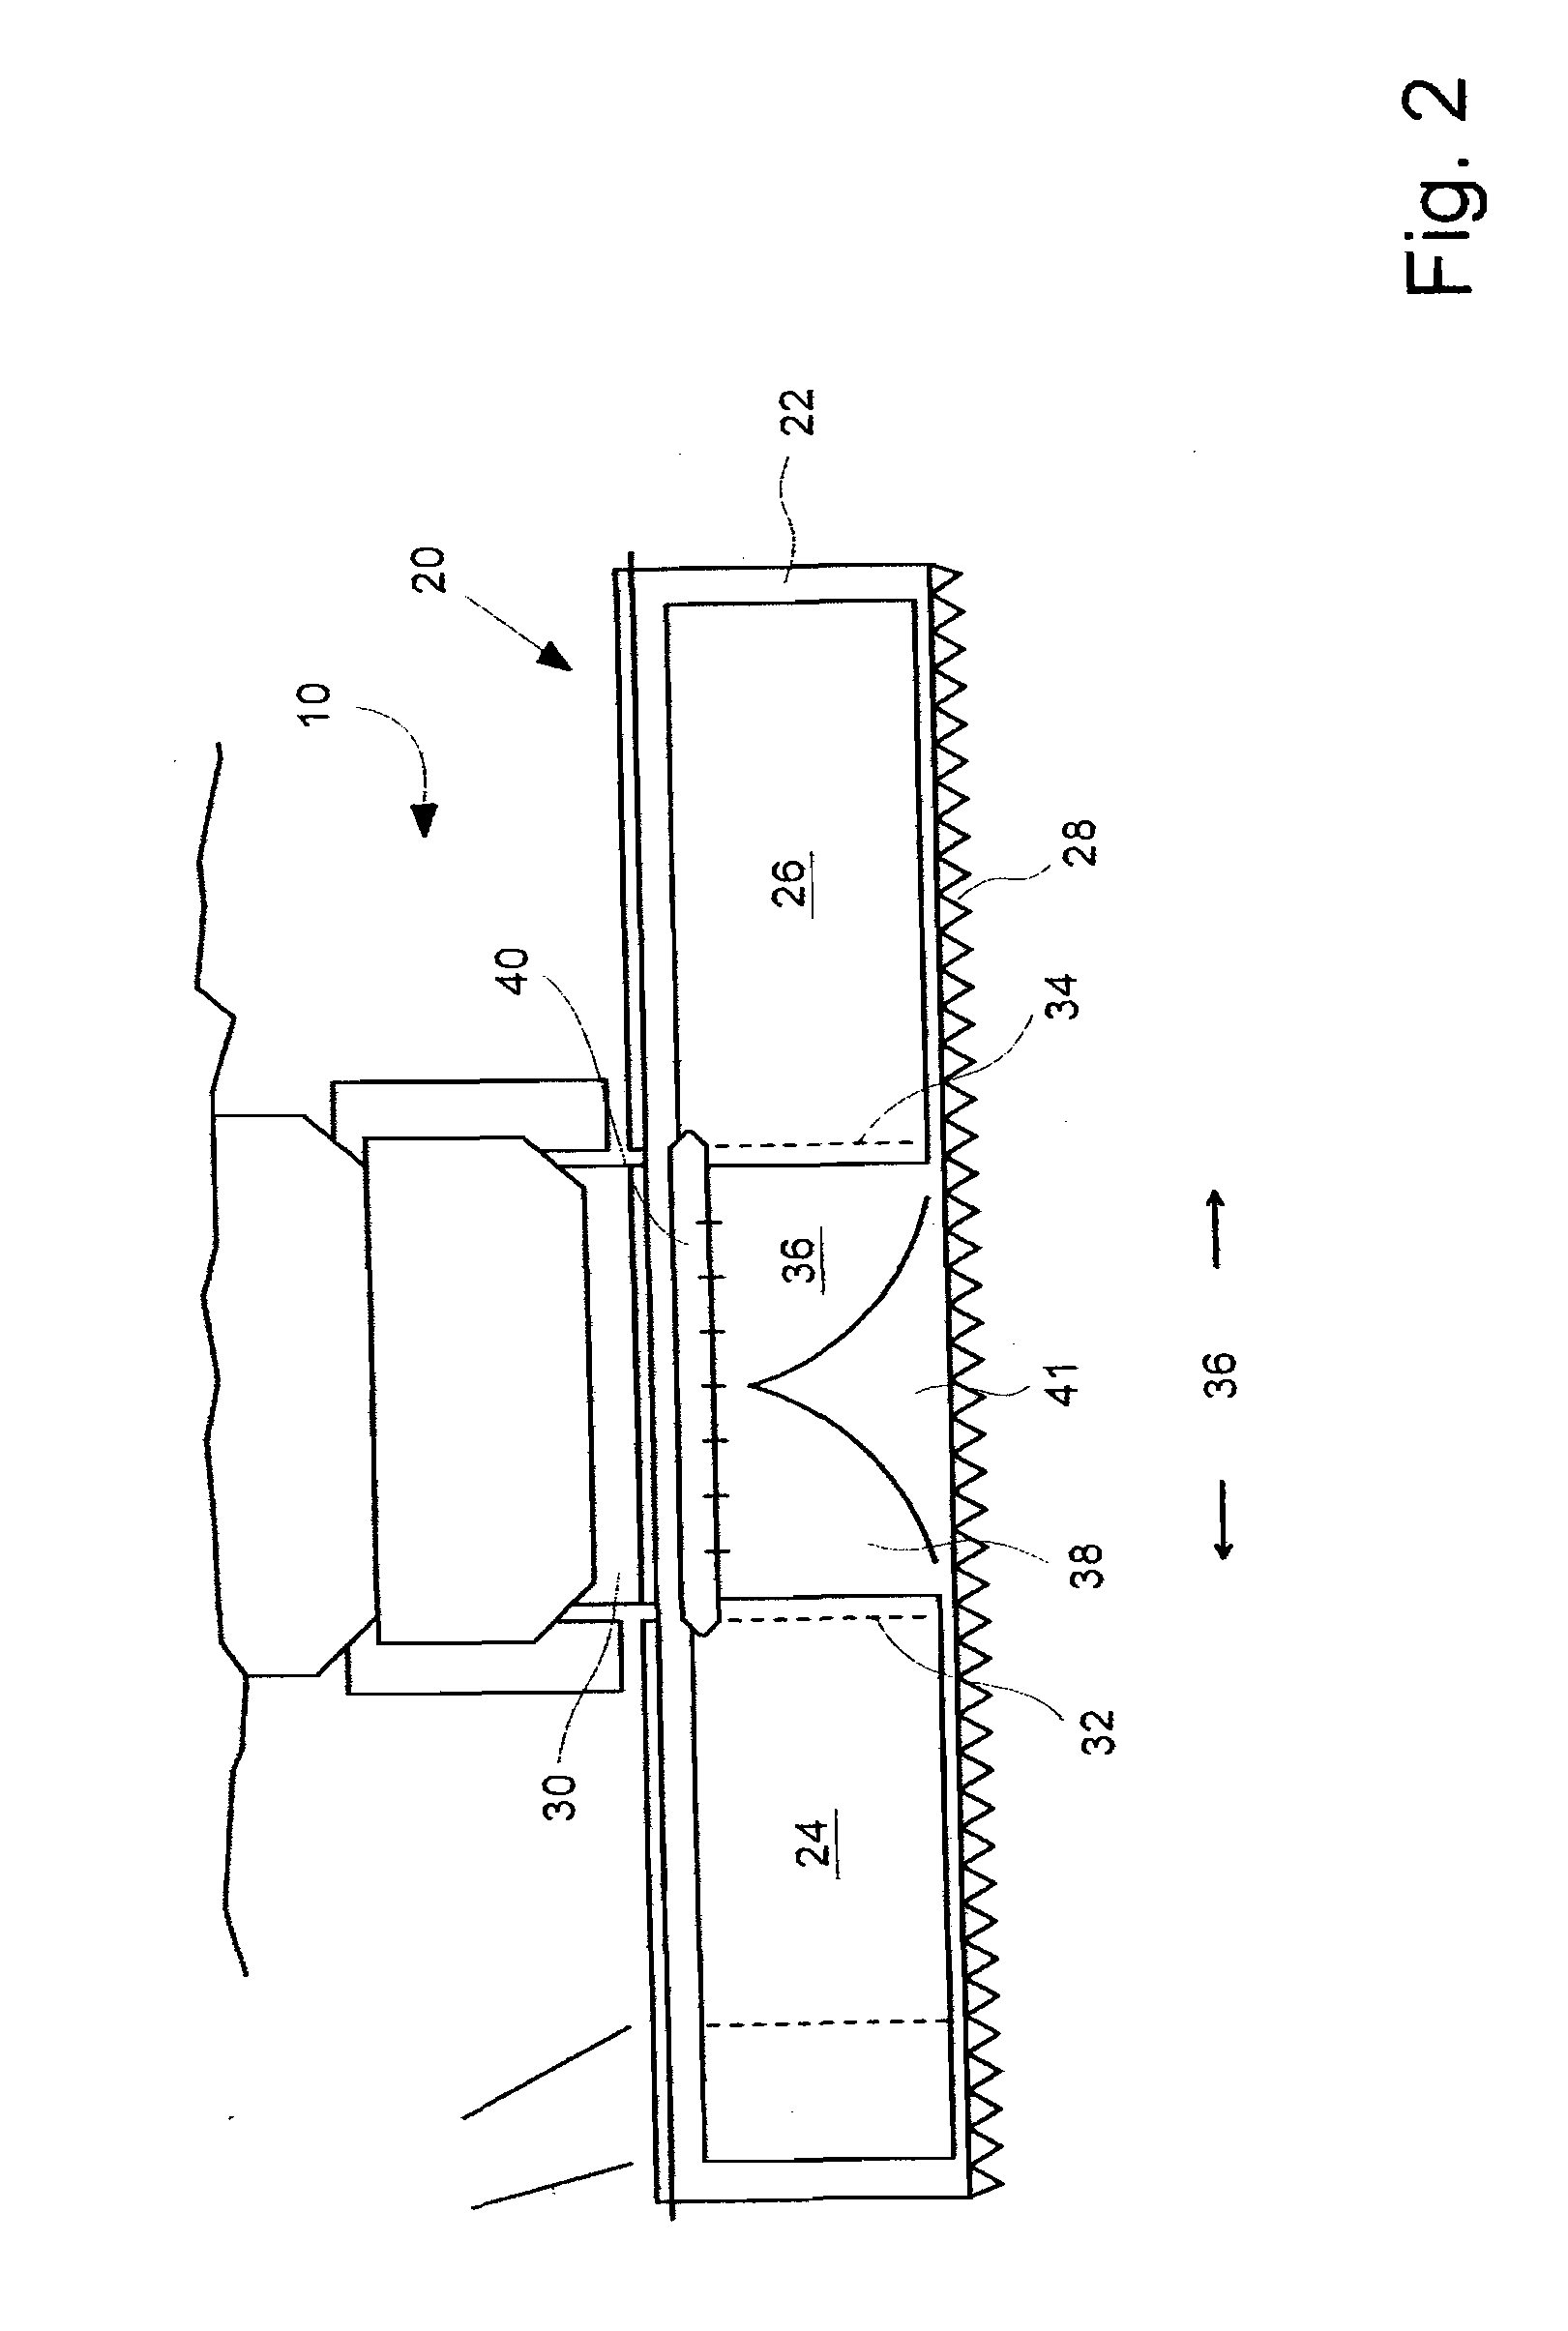 Central auger crop feed system for a harvester